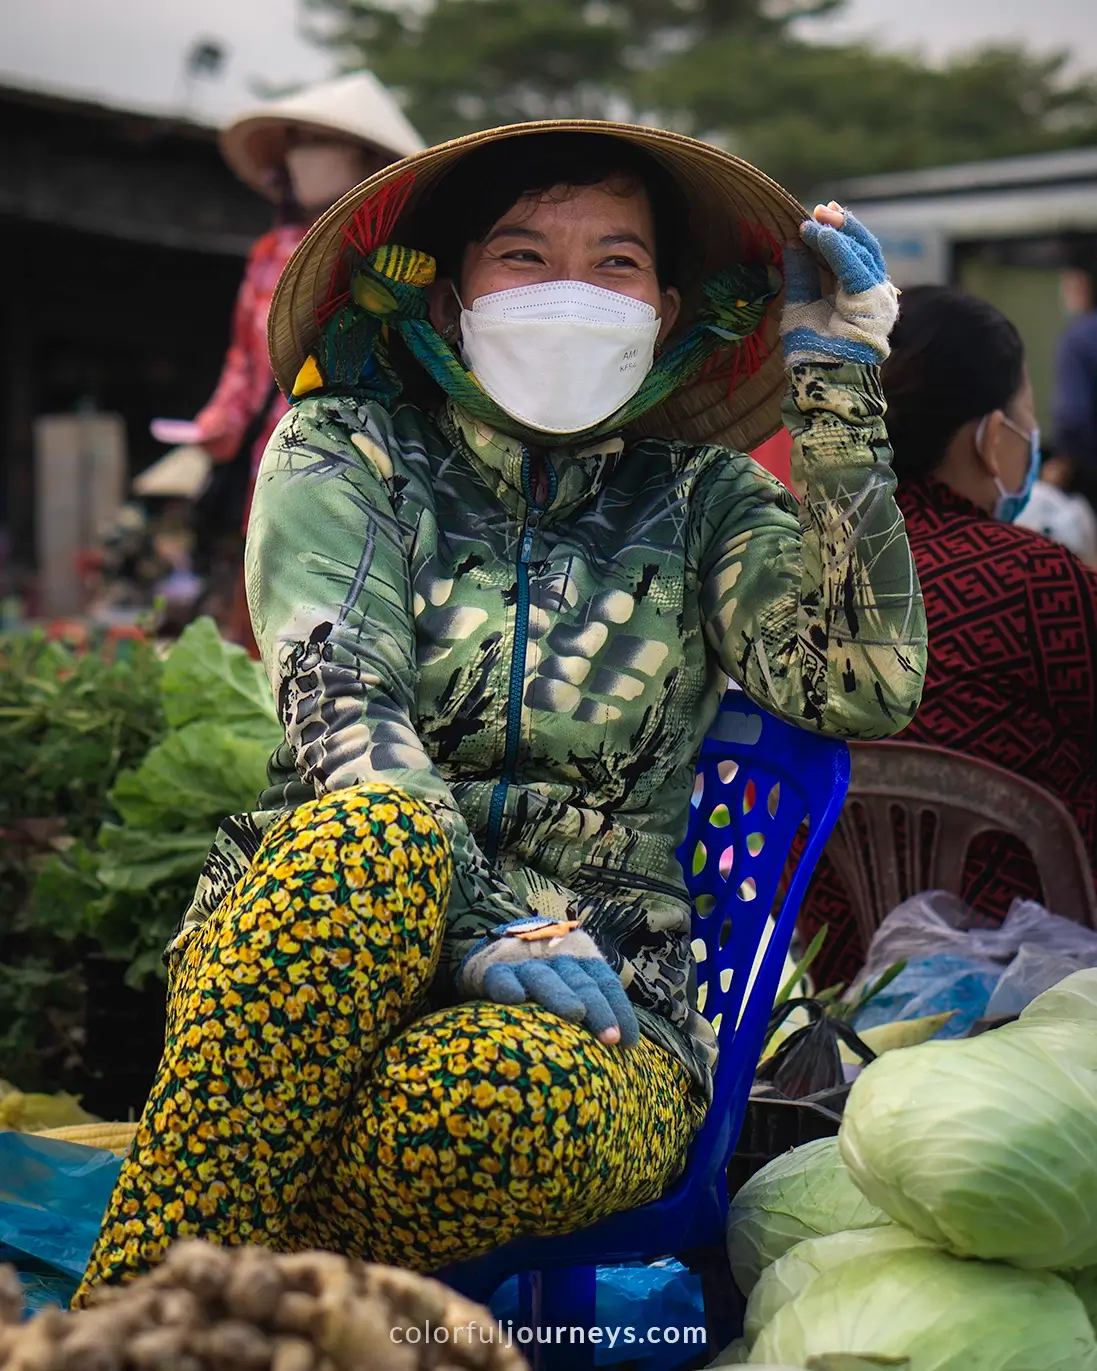 A woman selling goods at a market in Vietnam